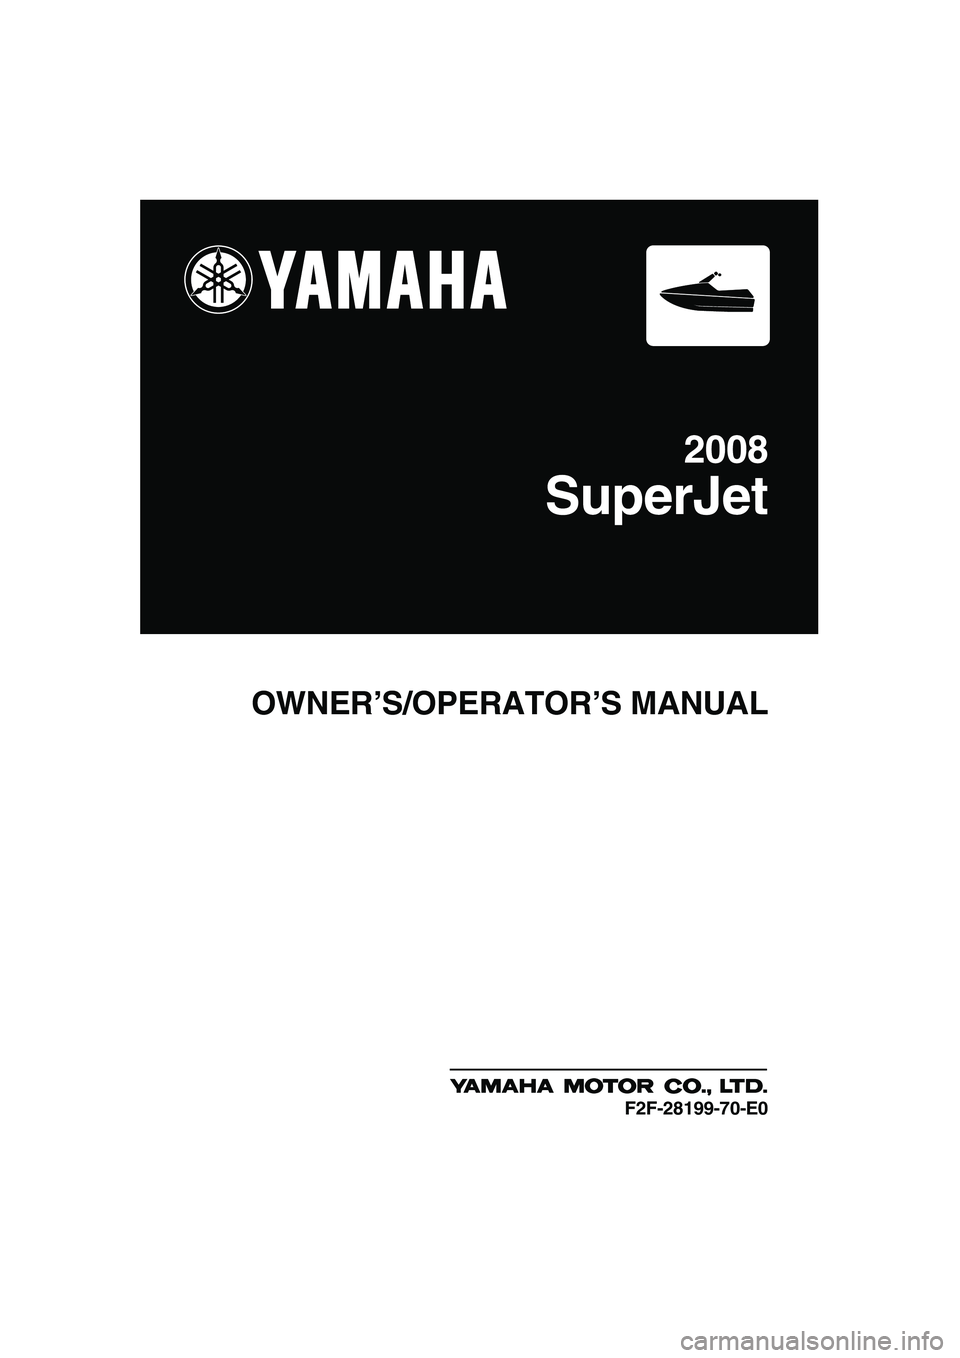 YAMAHA SUPERJET 2008  Owners Manual OWNER’S/OPERATOR’S MANUAL
2008
SuperJet
F2F-28199-70-E0
UF2F70E0.book  Page 1  Tuesday, April 17, 2007  9:56 AM 